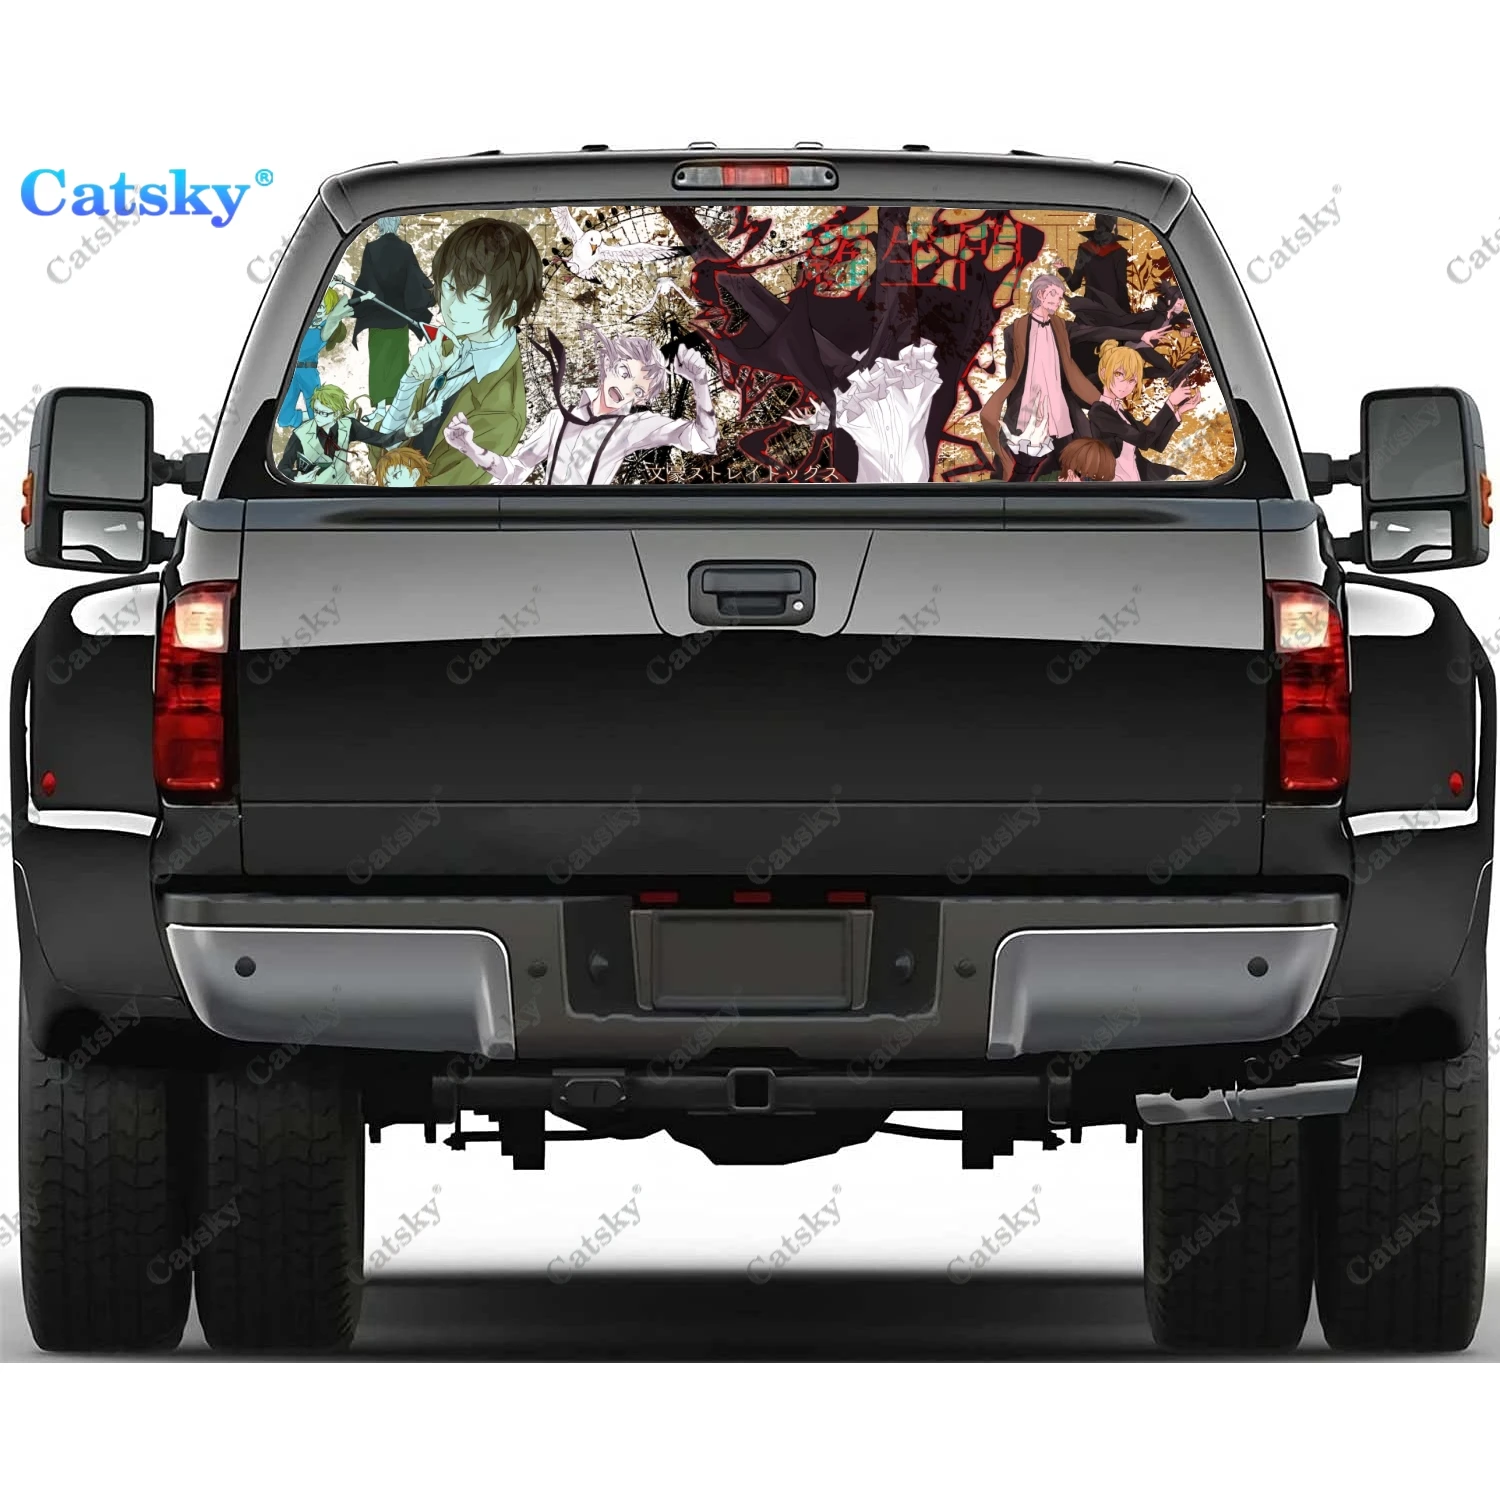 

Bungou Stray Dogs Print Rear Window Stickers Windshield Decal Truck Rear Window Decal Universal Tint Perforated Vinyl Graphic